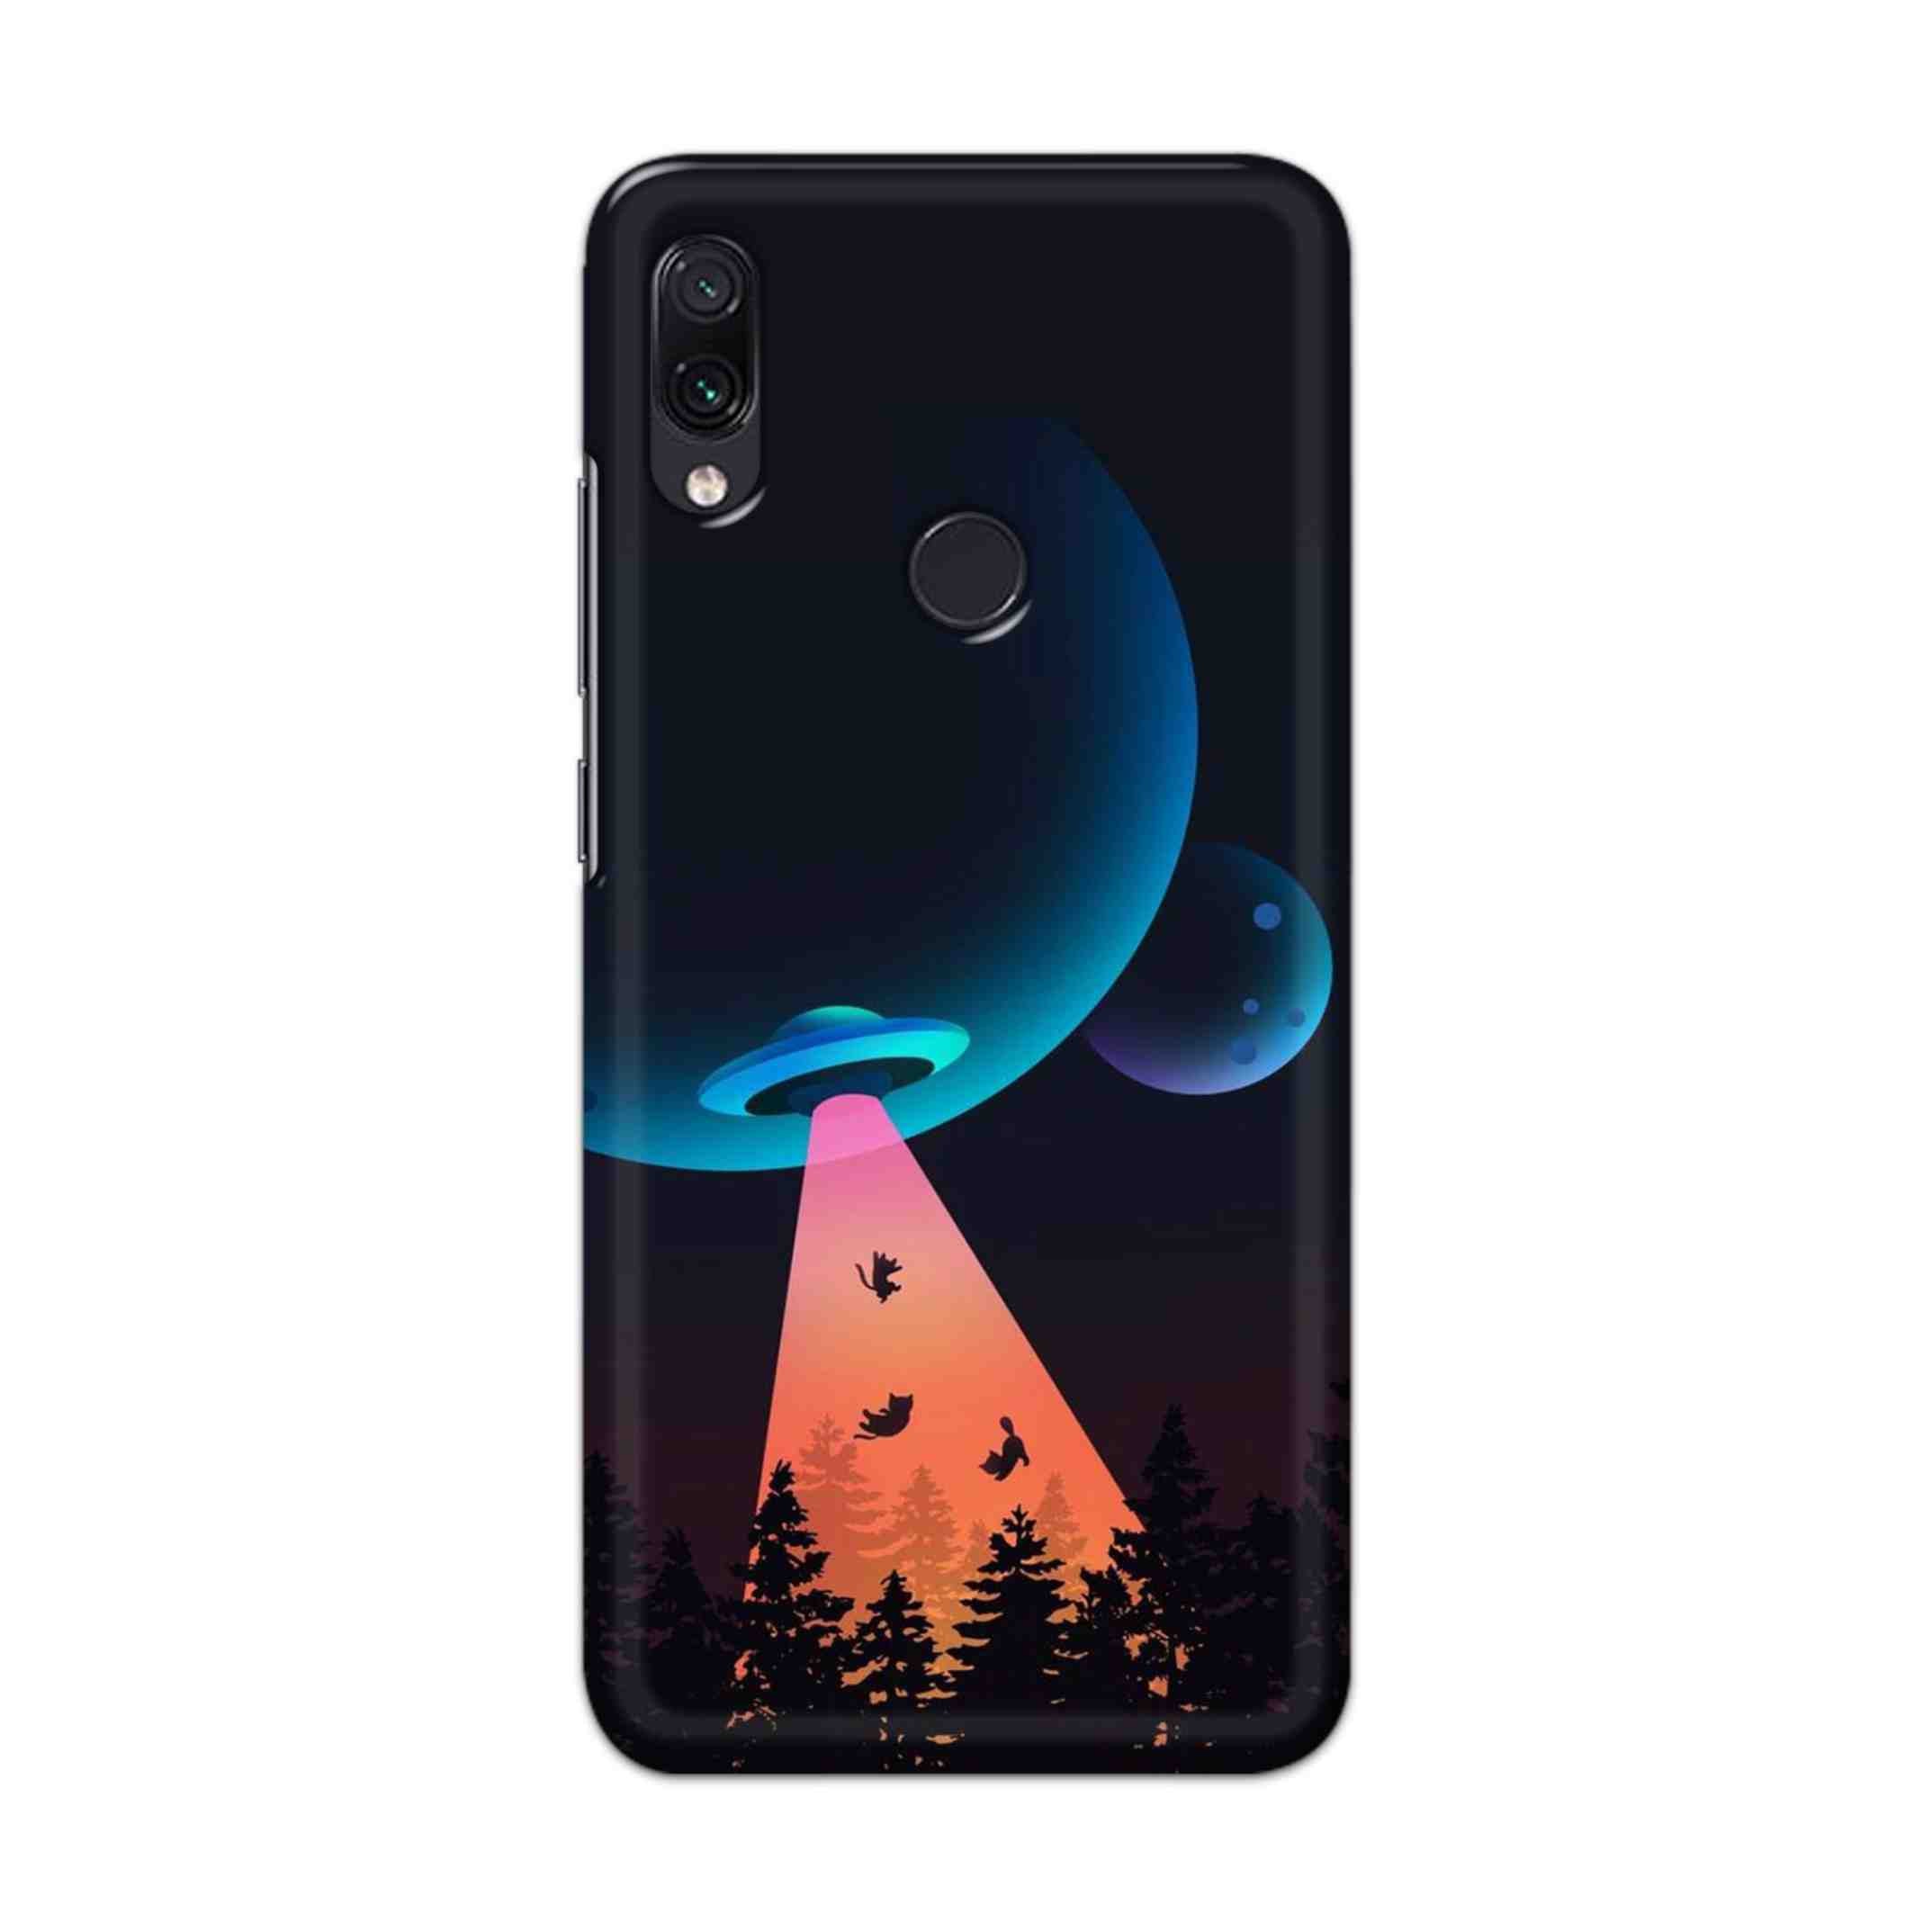 Buy Spaceship Hard Back Mobile Phone Case Cover For Xiaomi Redmi 7 Online